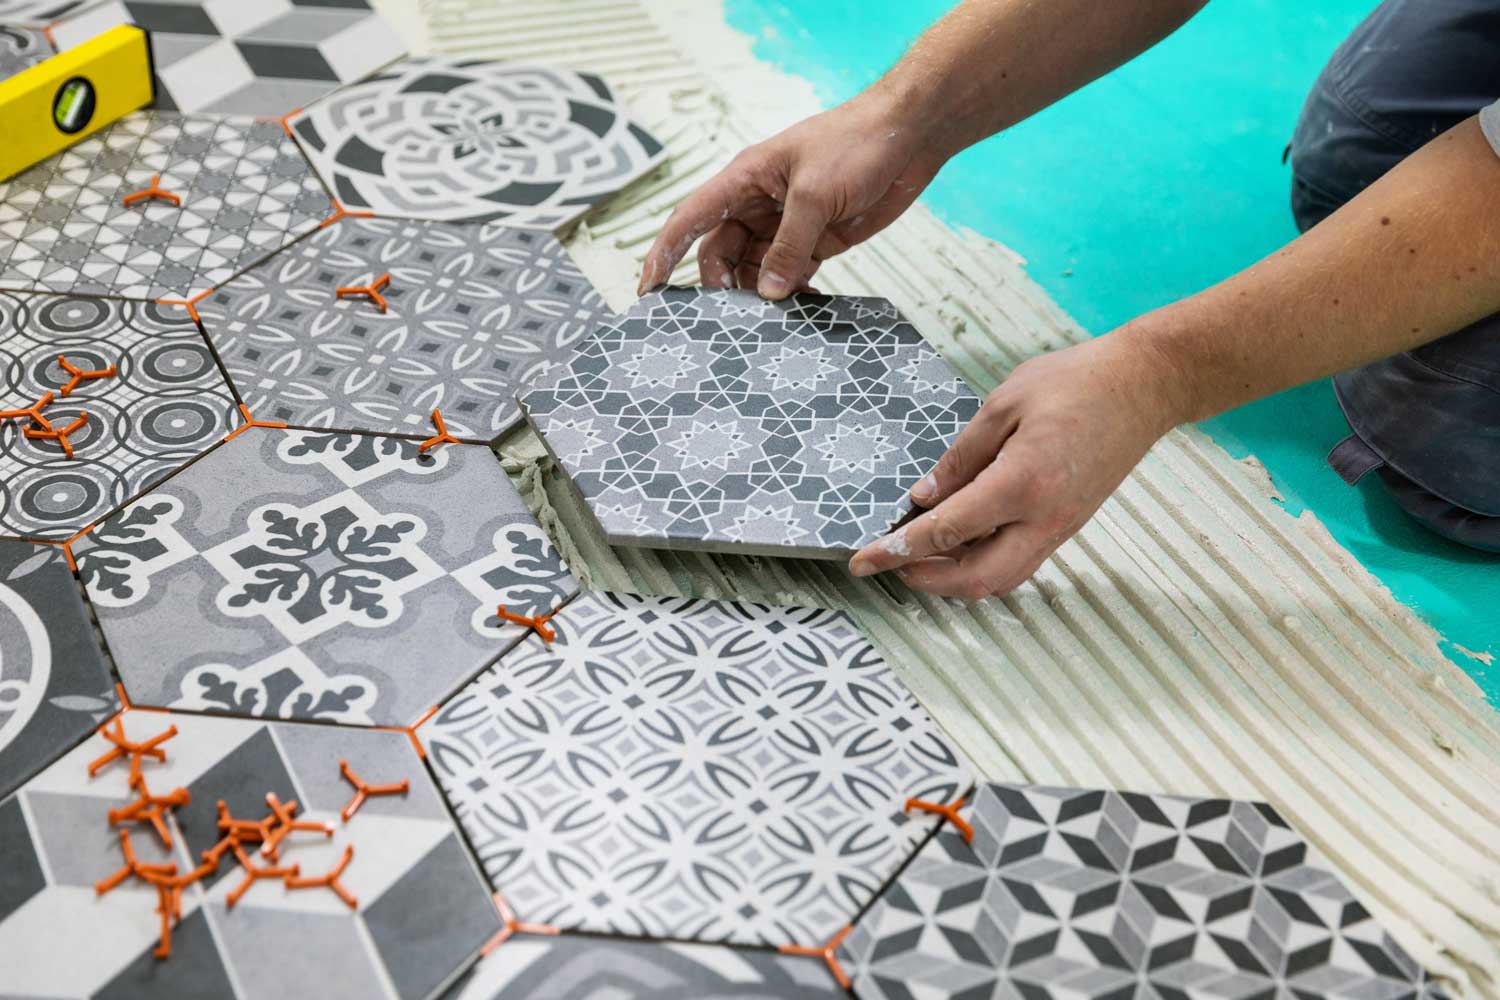 Our tile installation professionals in Sarasota / Venice will help bring your floors back to life.